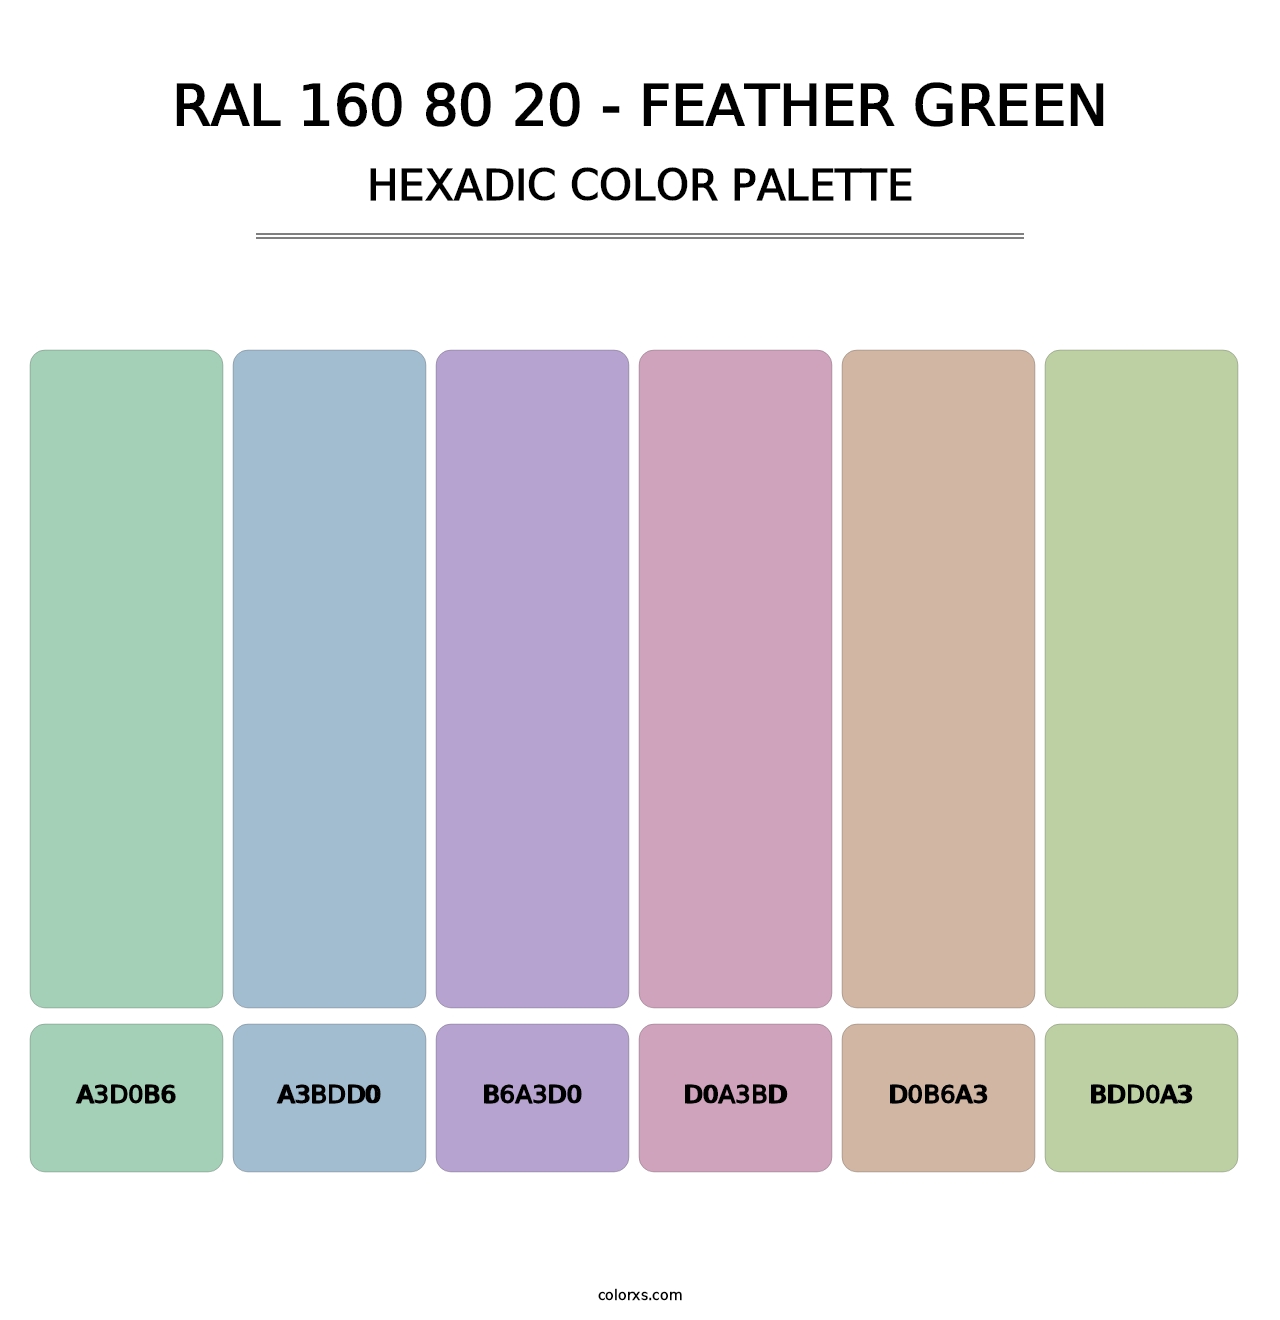 RAL 160 80 20 - Feather Green - Hexadic Color Palette